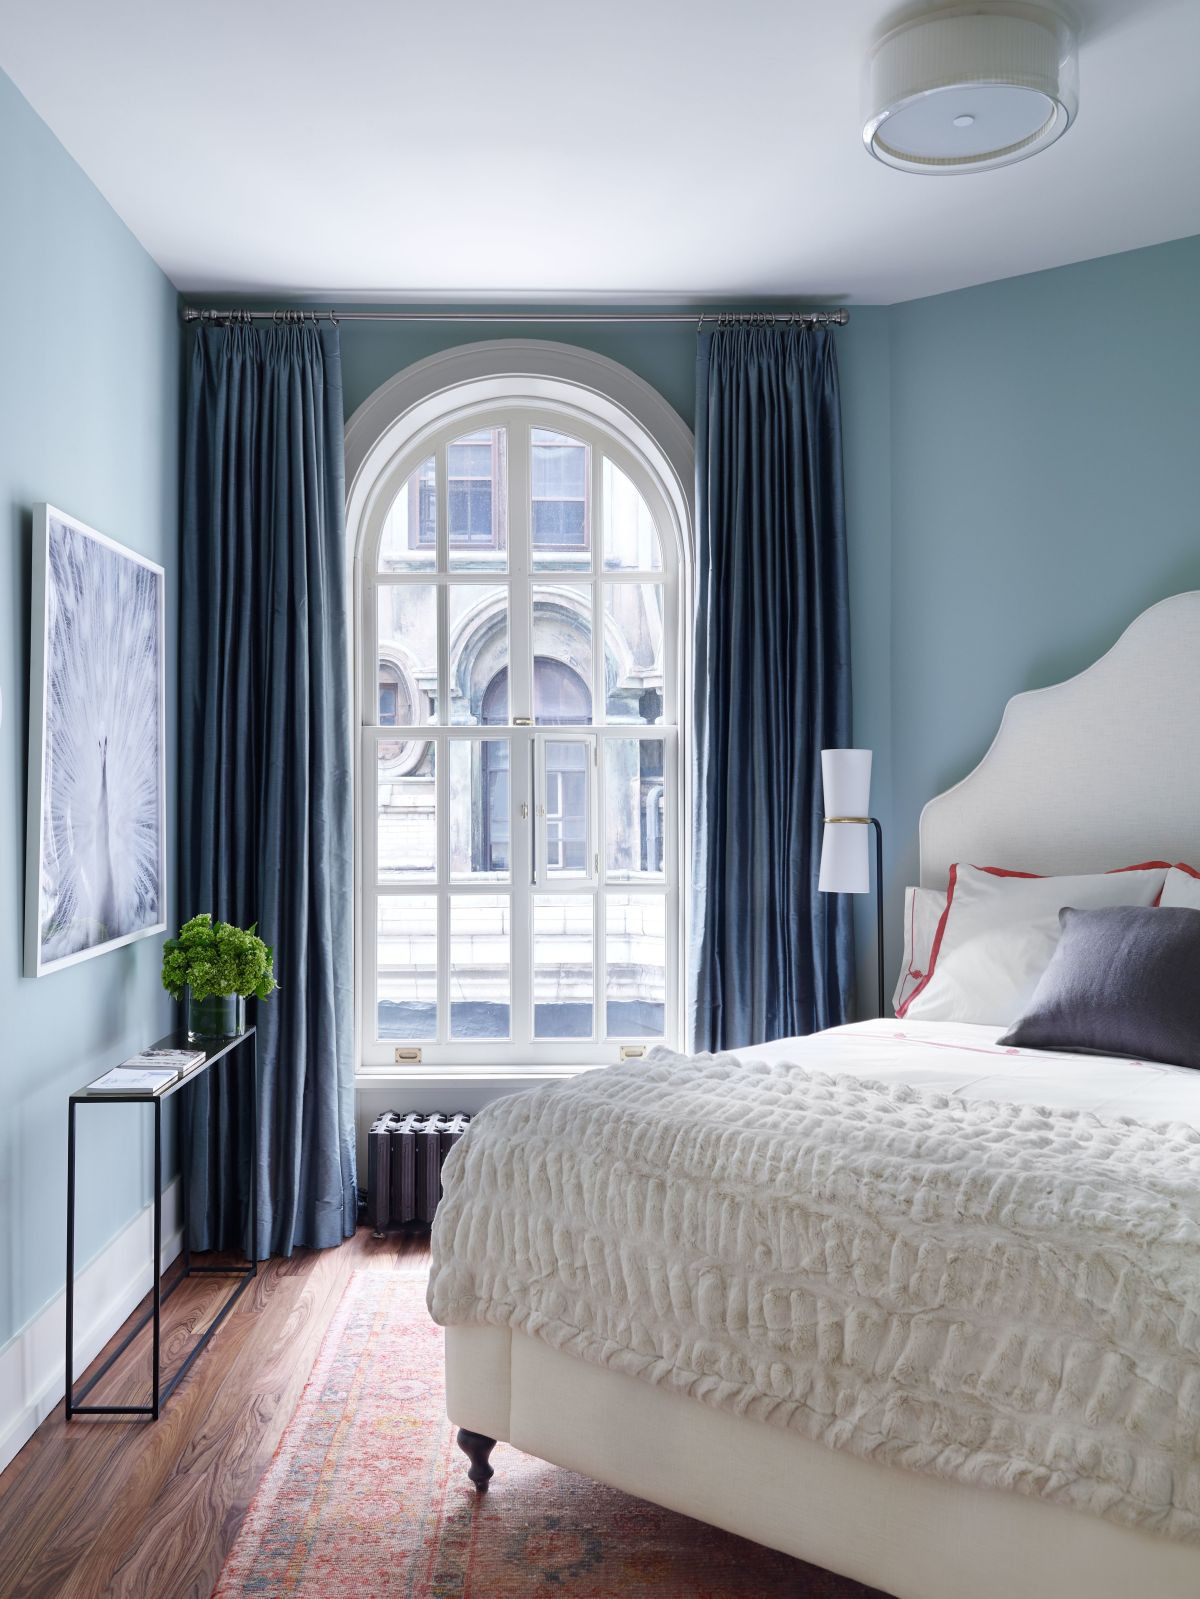 Best Paint For Bedroom
 The Four Best Paint Colors For Bedrooms